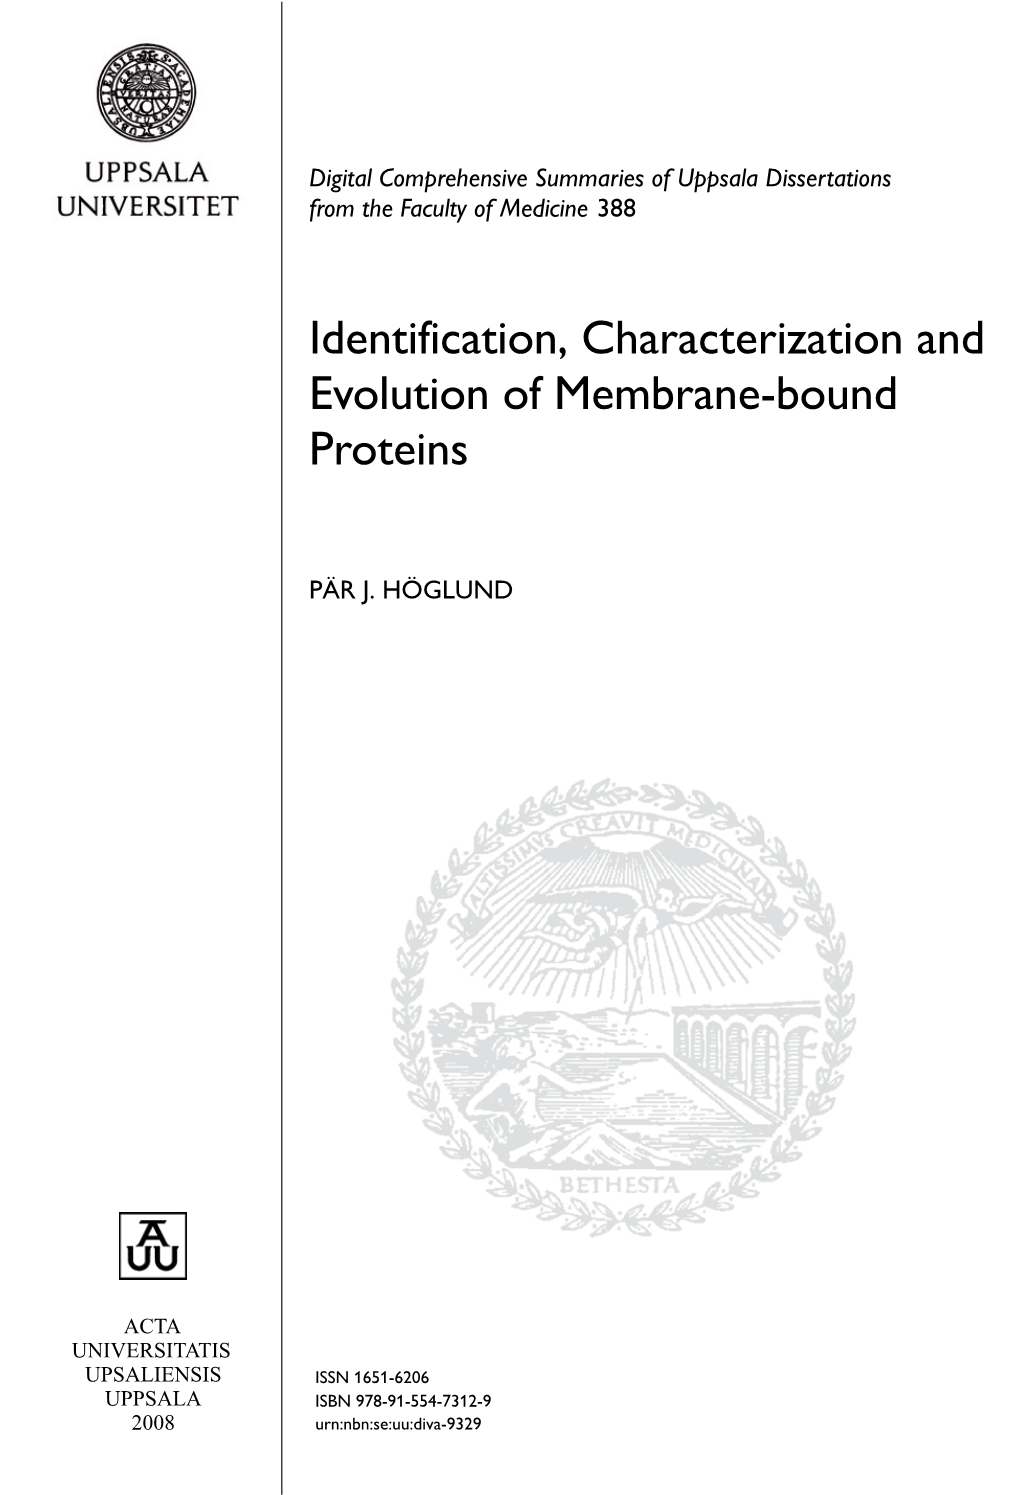 Identification, Characterization and Evolution of Membrane-Bound Proteins